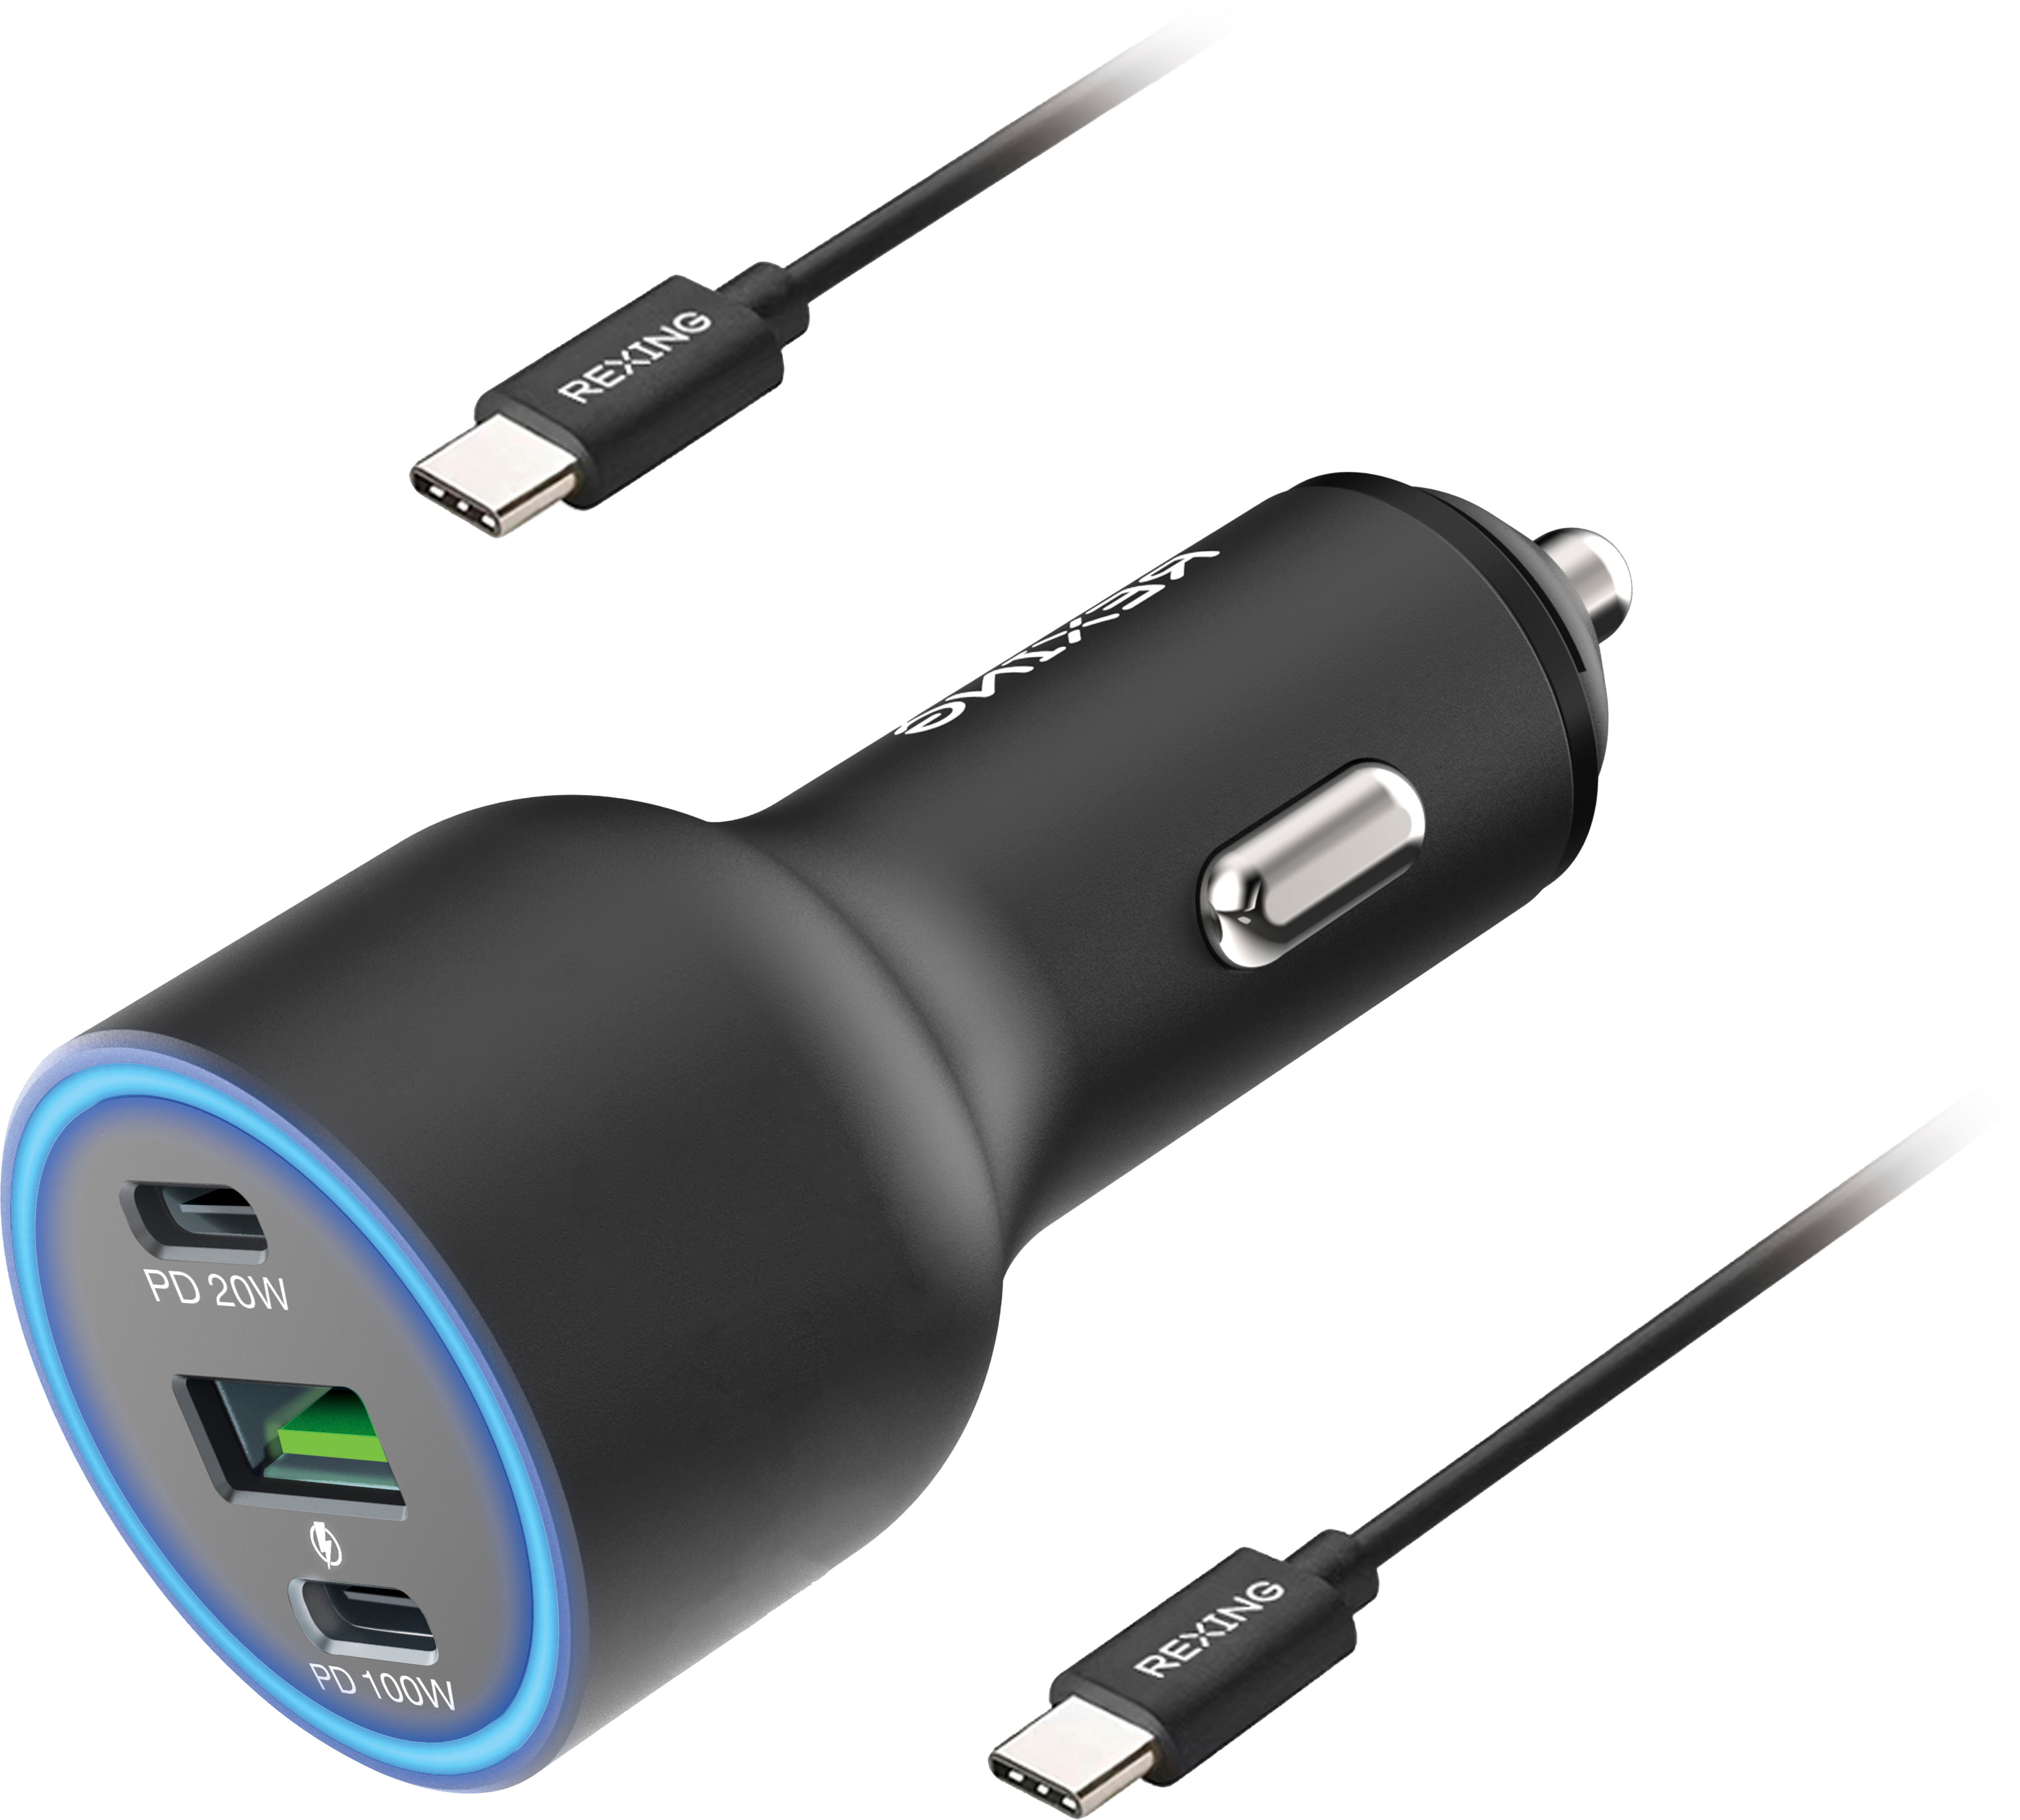 120W Vehicle Quick Charger with 2 USB-C 1 USB Port Compatible with iPhone and Samsung Note Gray BBY120WCHR - Best Buy